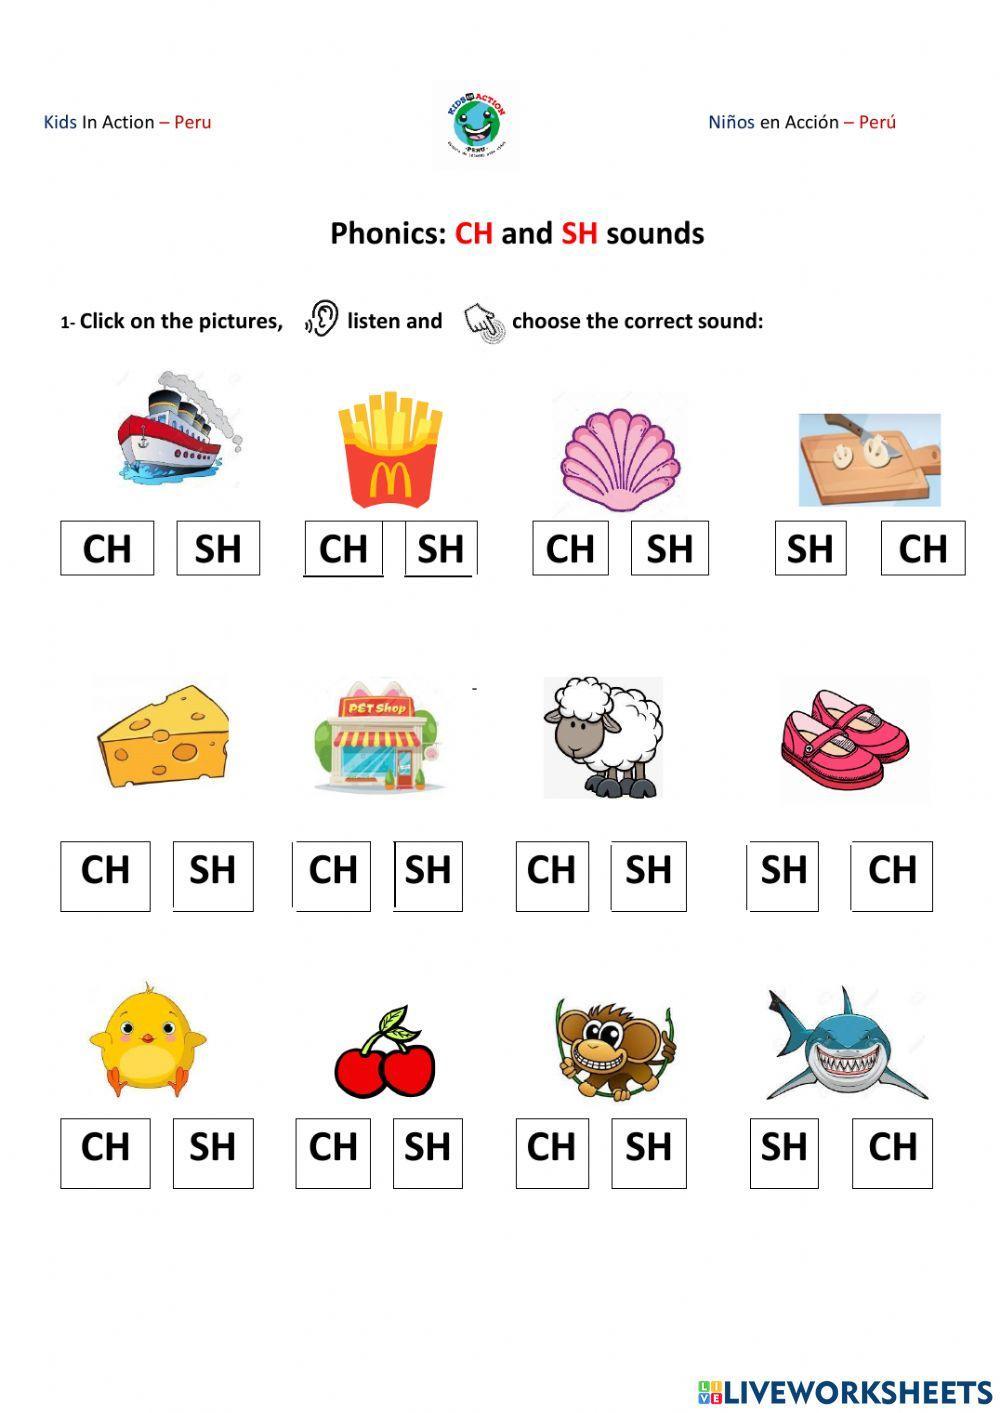 Sound ch and sh